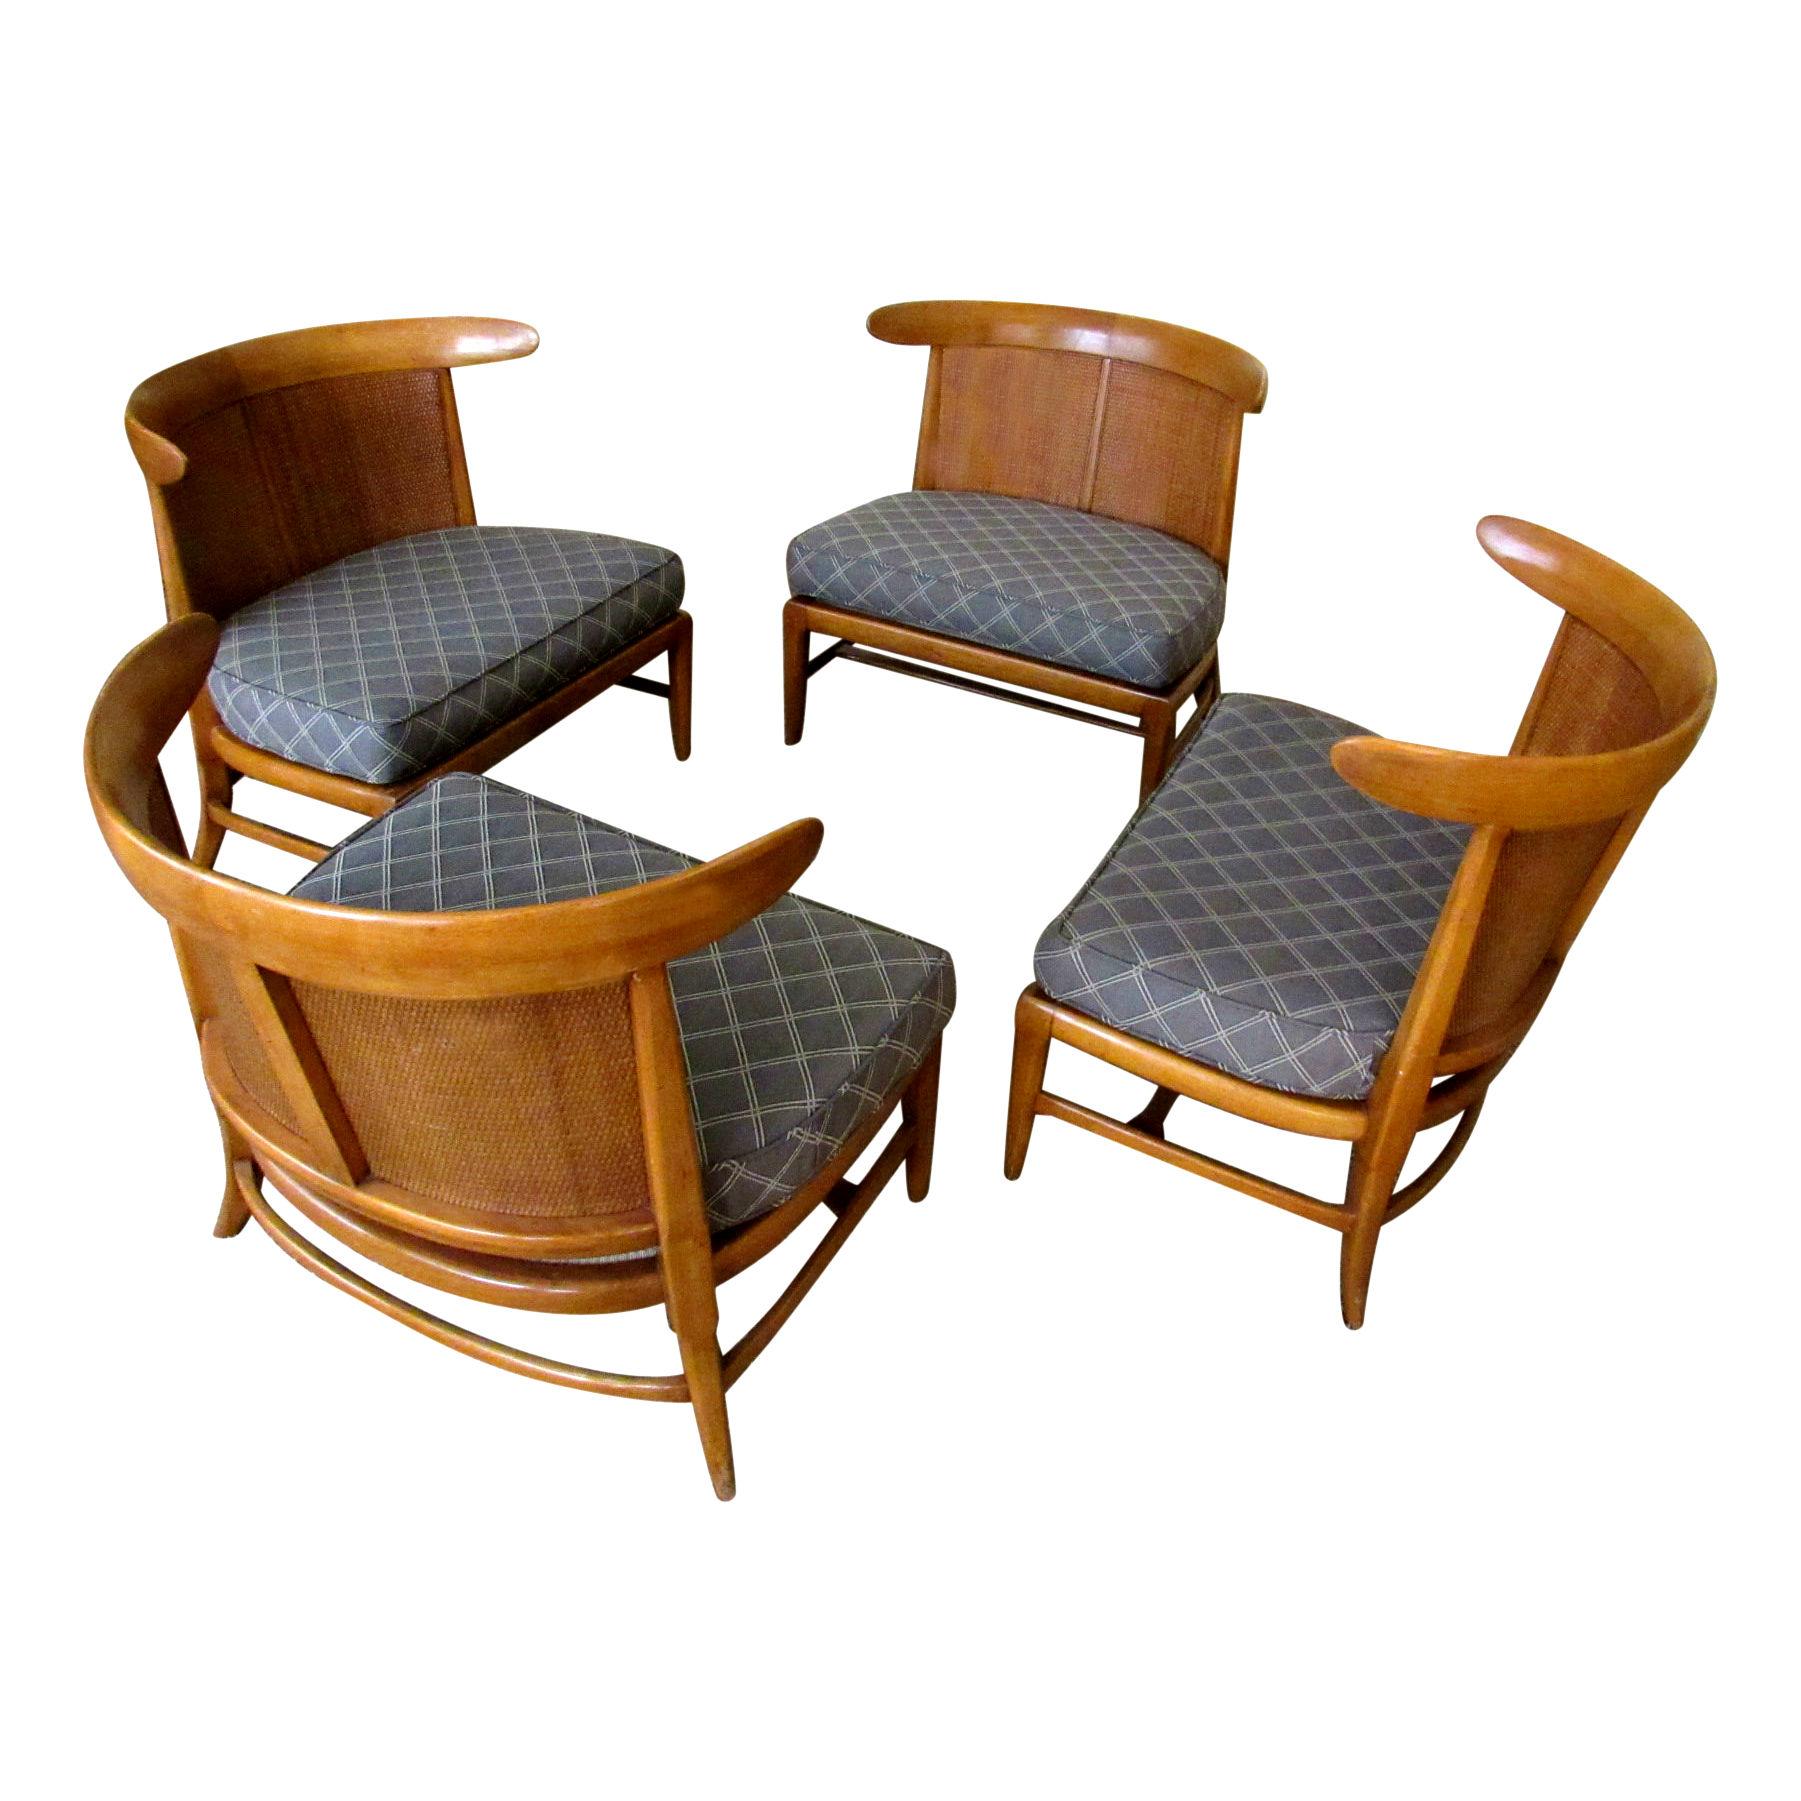 Four Midcentury Tomlinson Sophisticate Slipper Chairs, circa 1956 For Sale 4